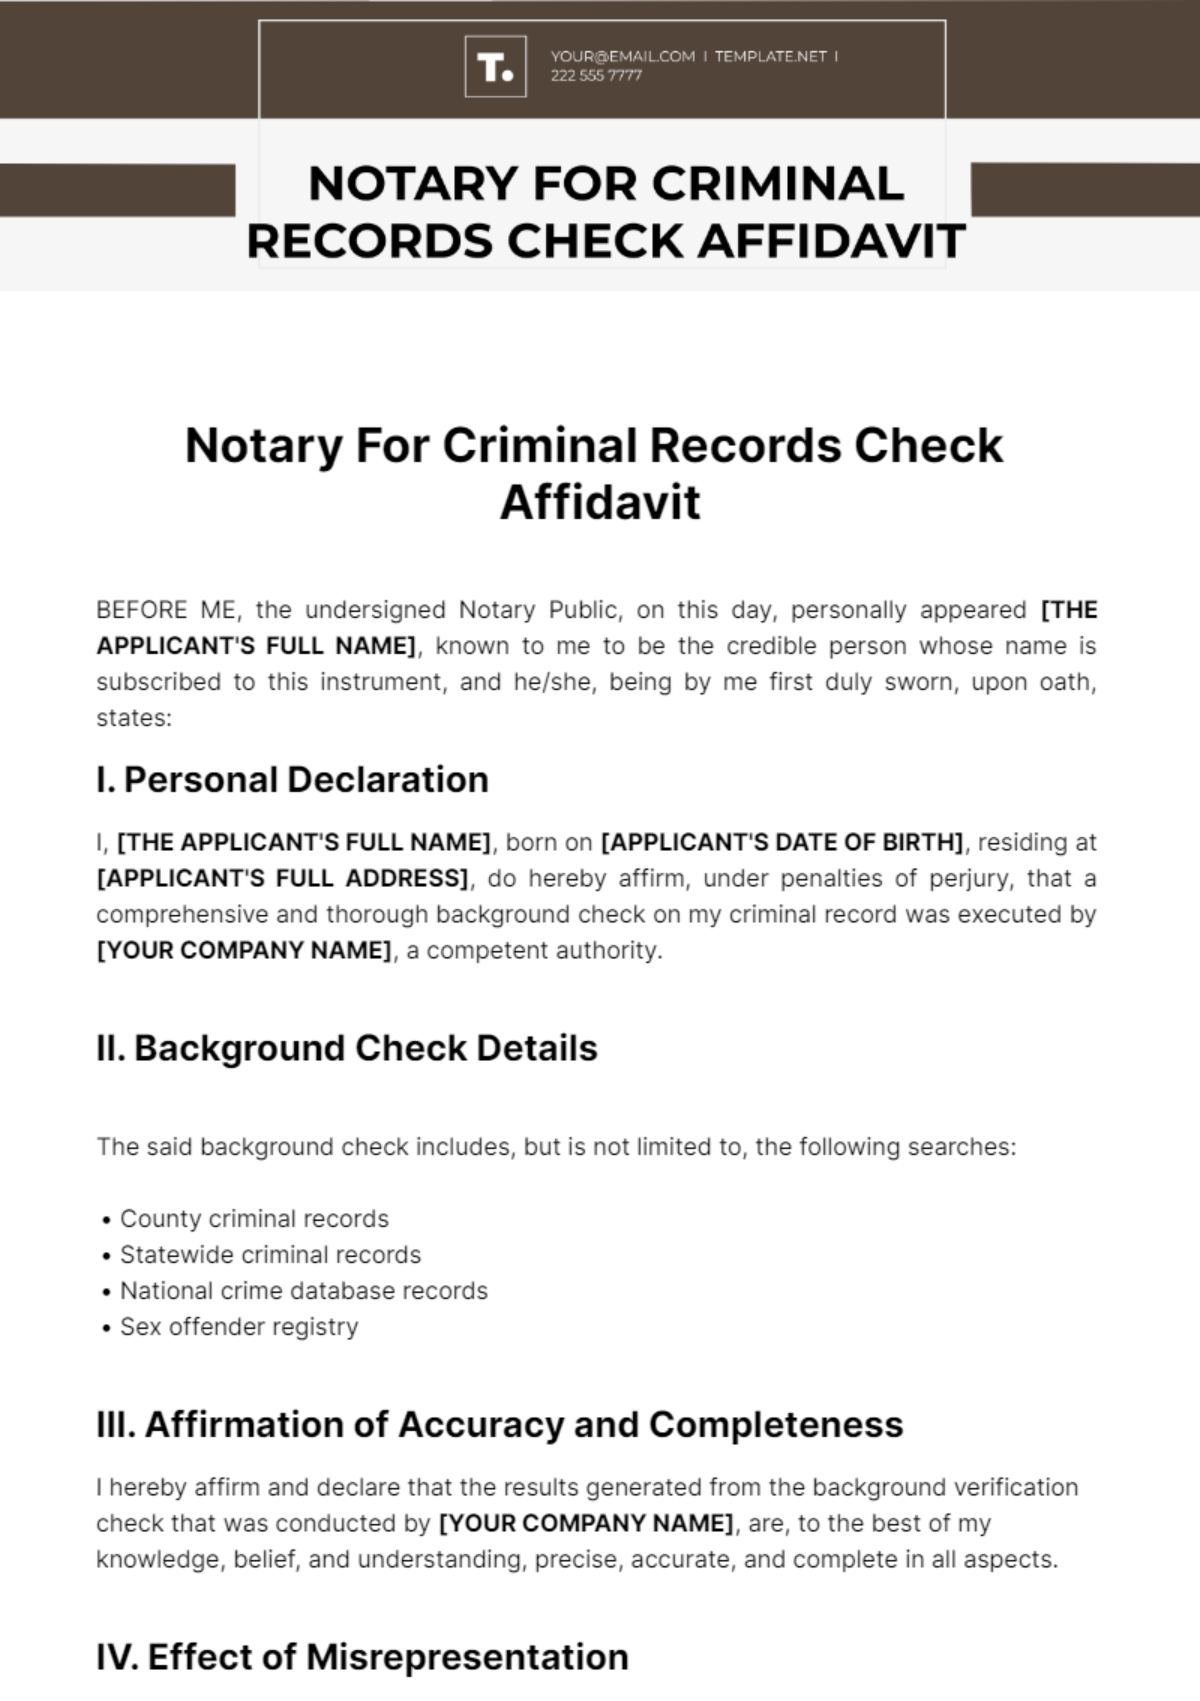 Free Notary For Criminal Records Check Affidavit Template